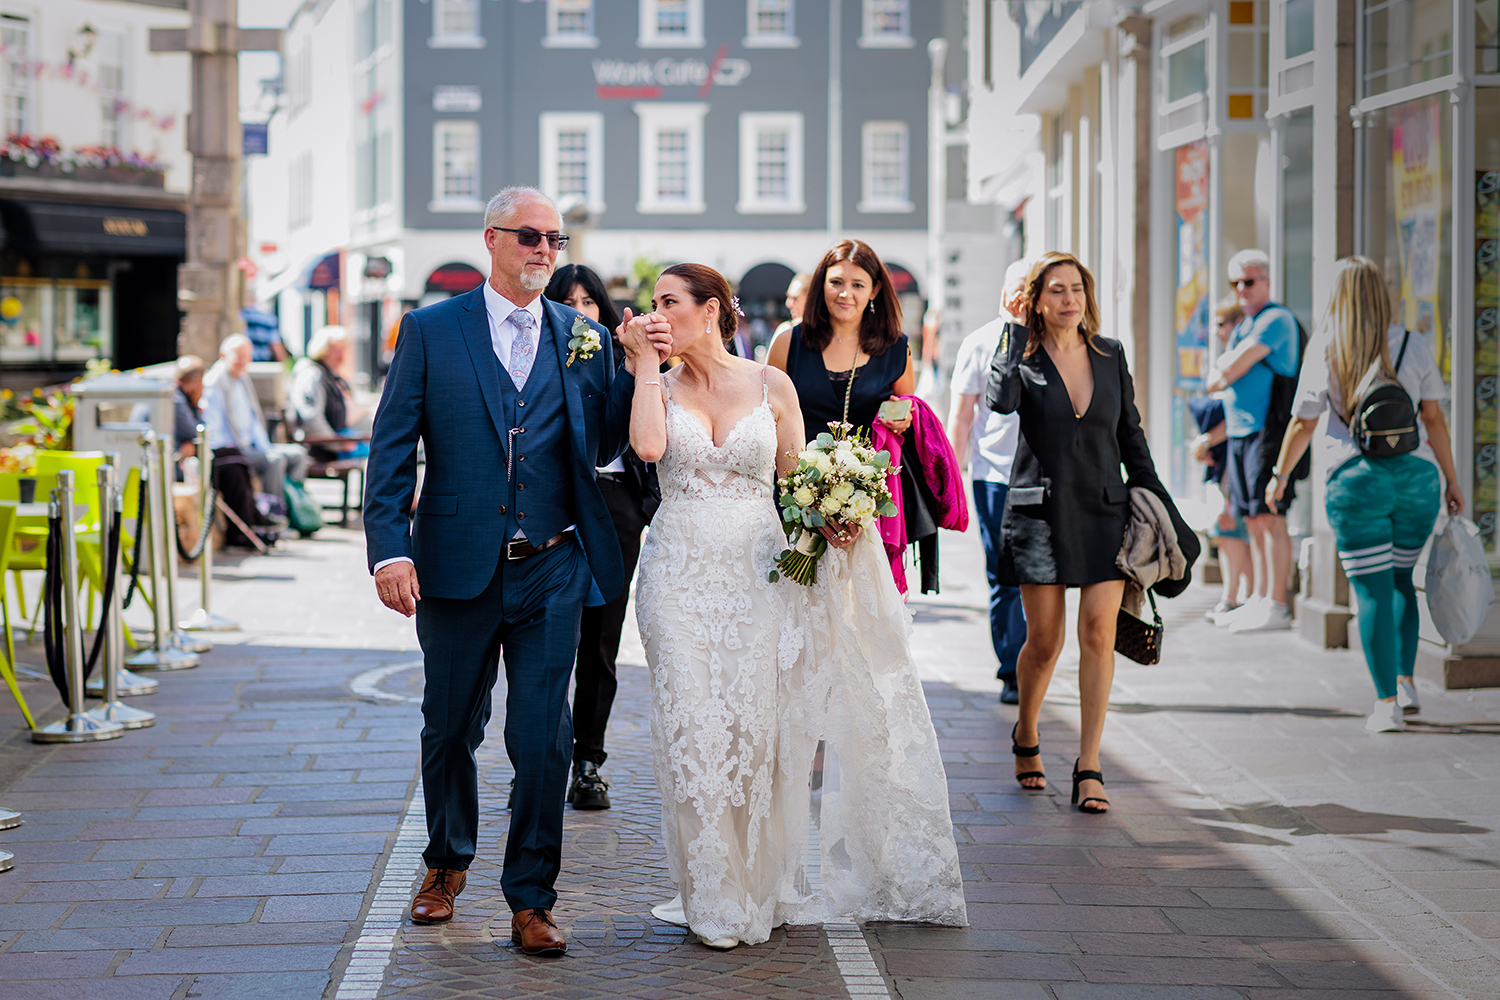 Steve and Berenice look joyful as they have become husband and wife after their wedding ceremony at The Old Magistrates Court, Jersey CI. They walk hand in hand through the streets of St Helier and Bernice kisses Steve's hand